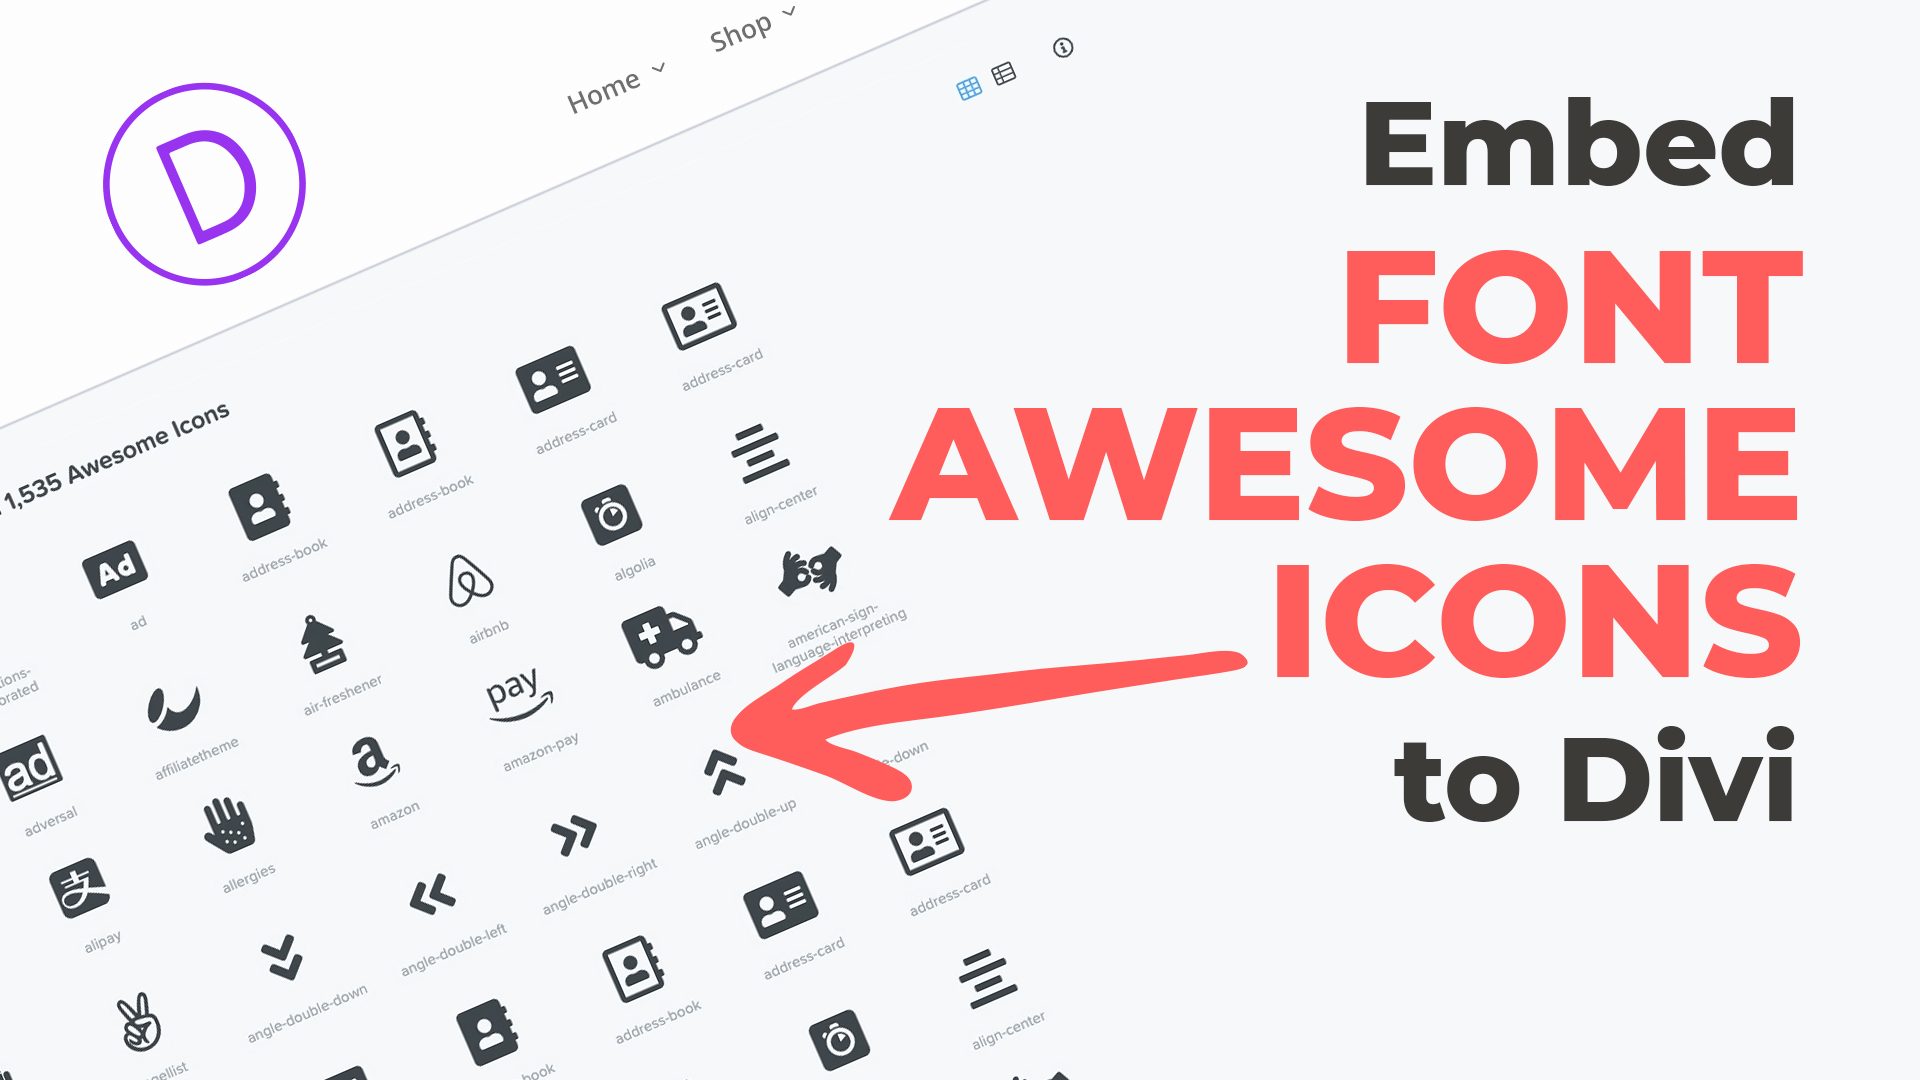 Embed Font Awesome Icons to Divi